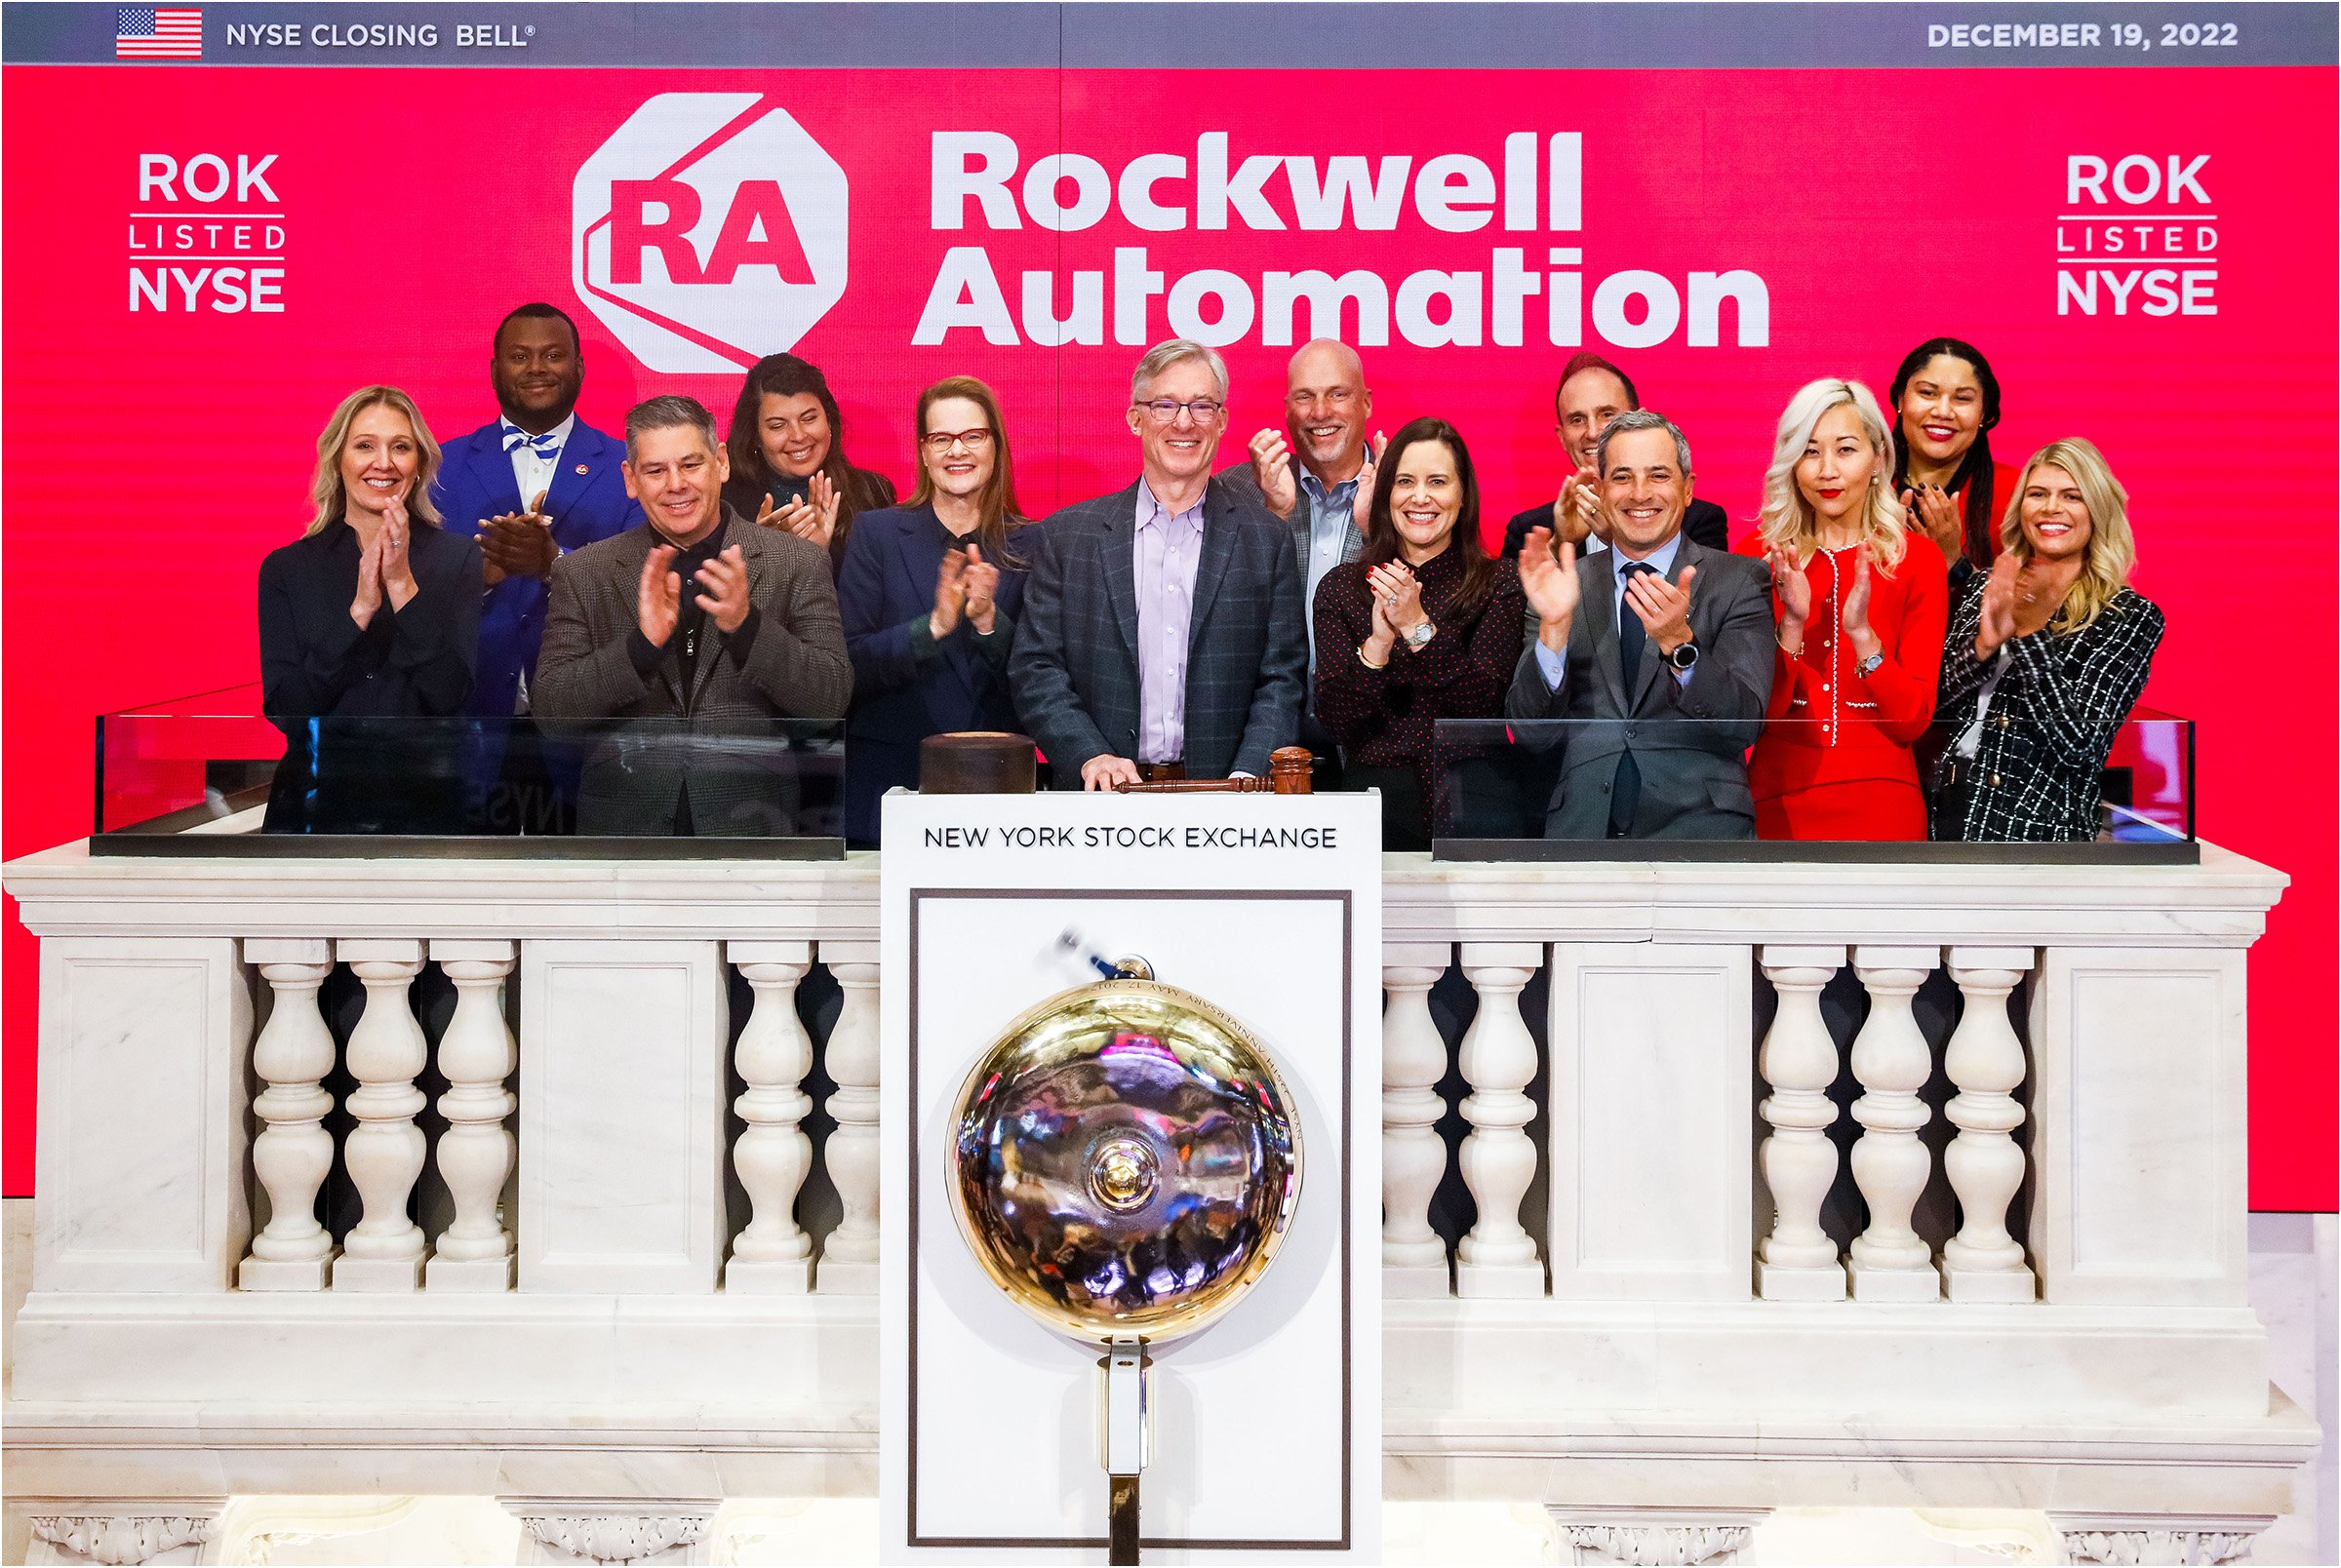 Rockwell Automation executives ring closing bell New York Stock Exchange December 19, 2022. Blake Moret, Becky House, Tessa Myers, others.